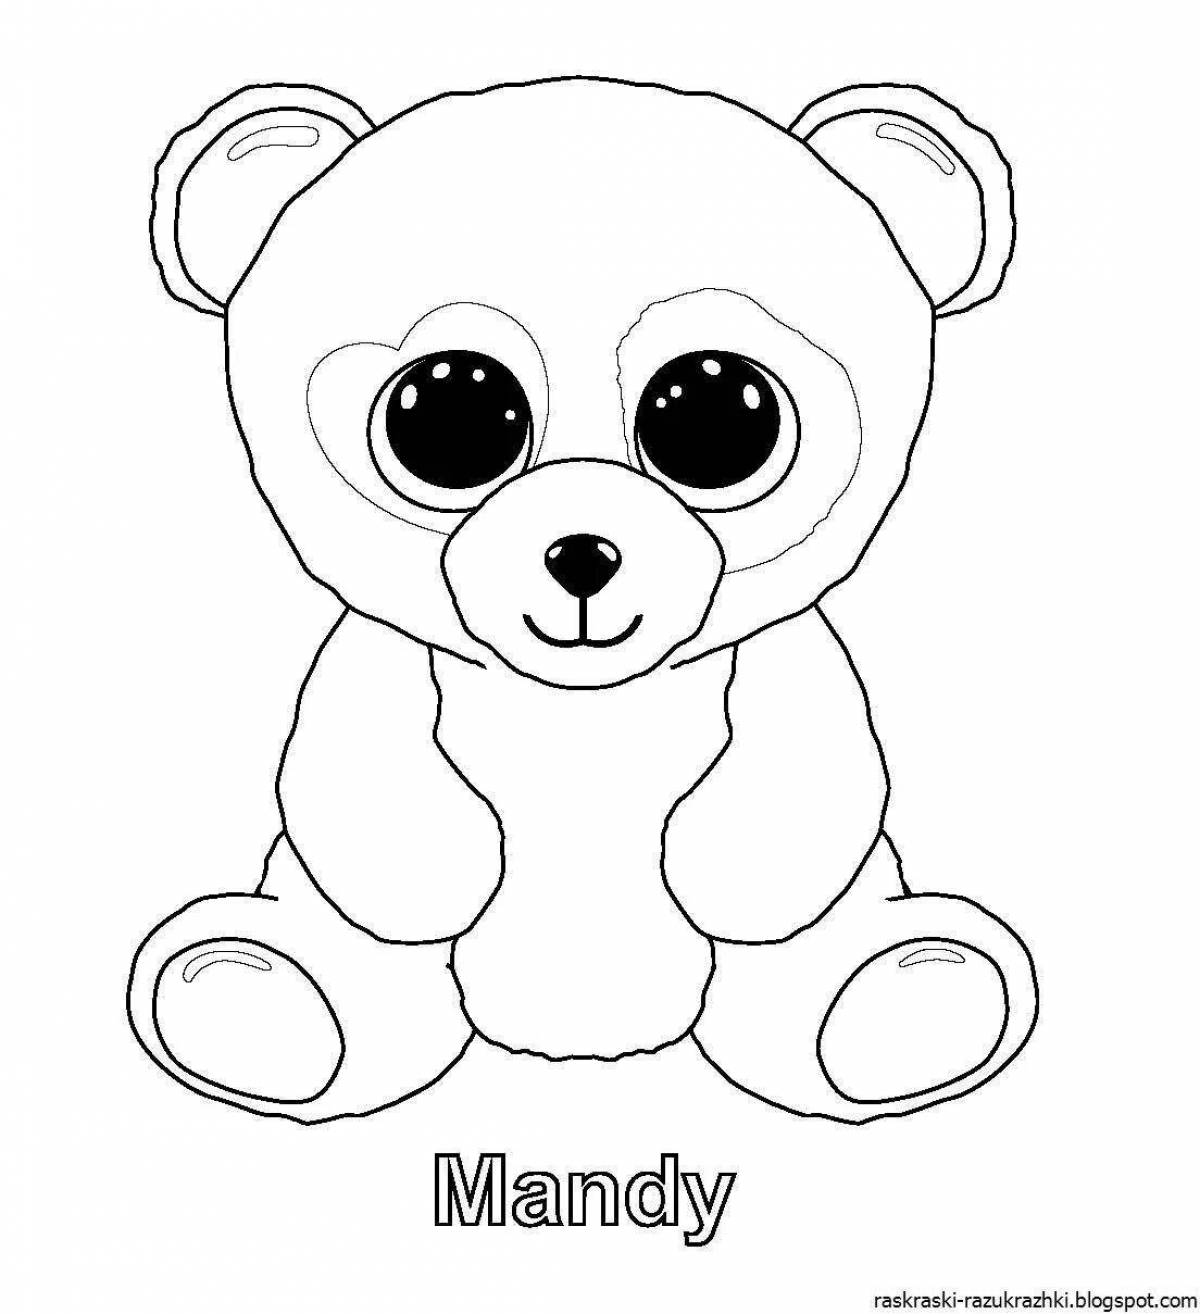 Mandy live coloring